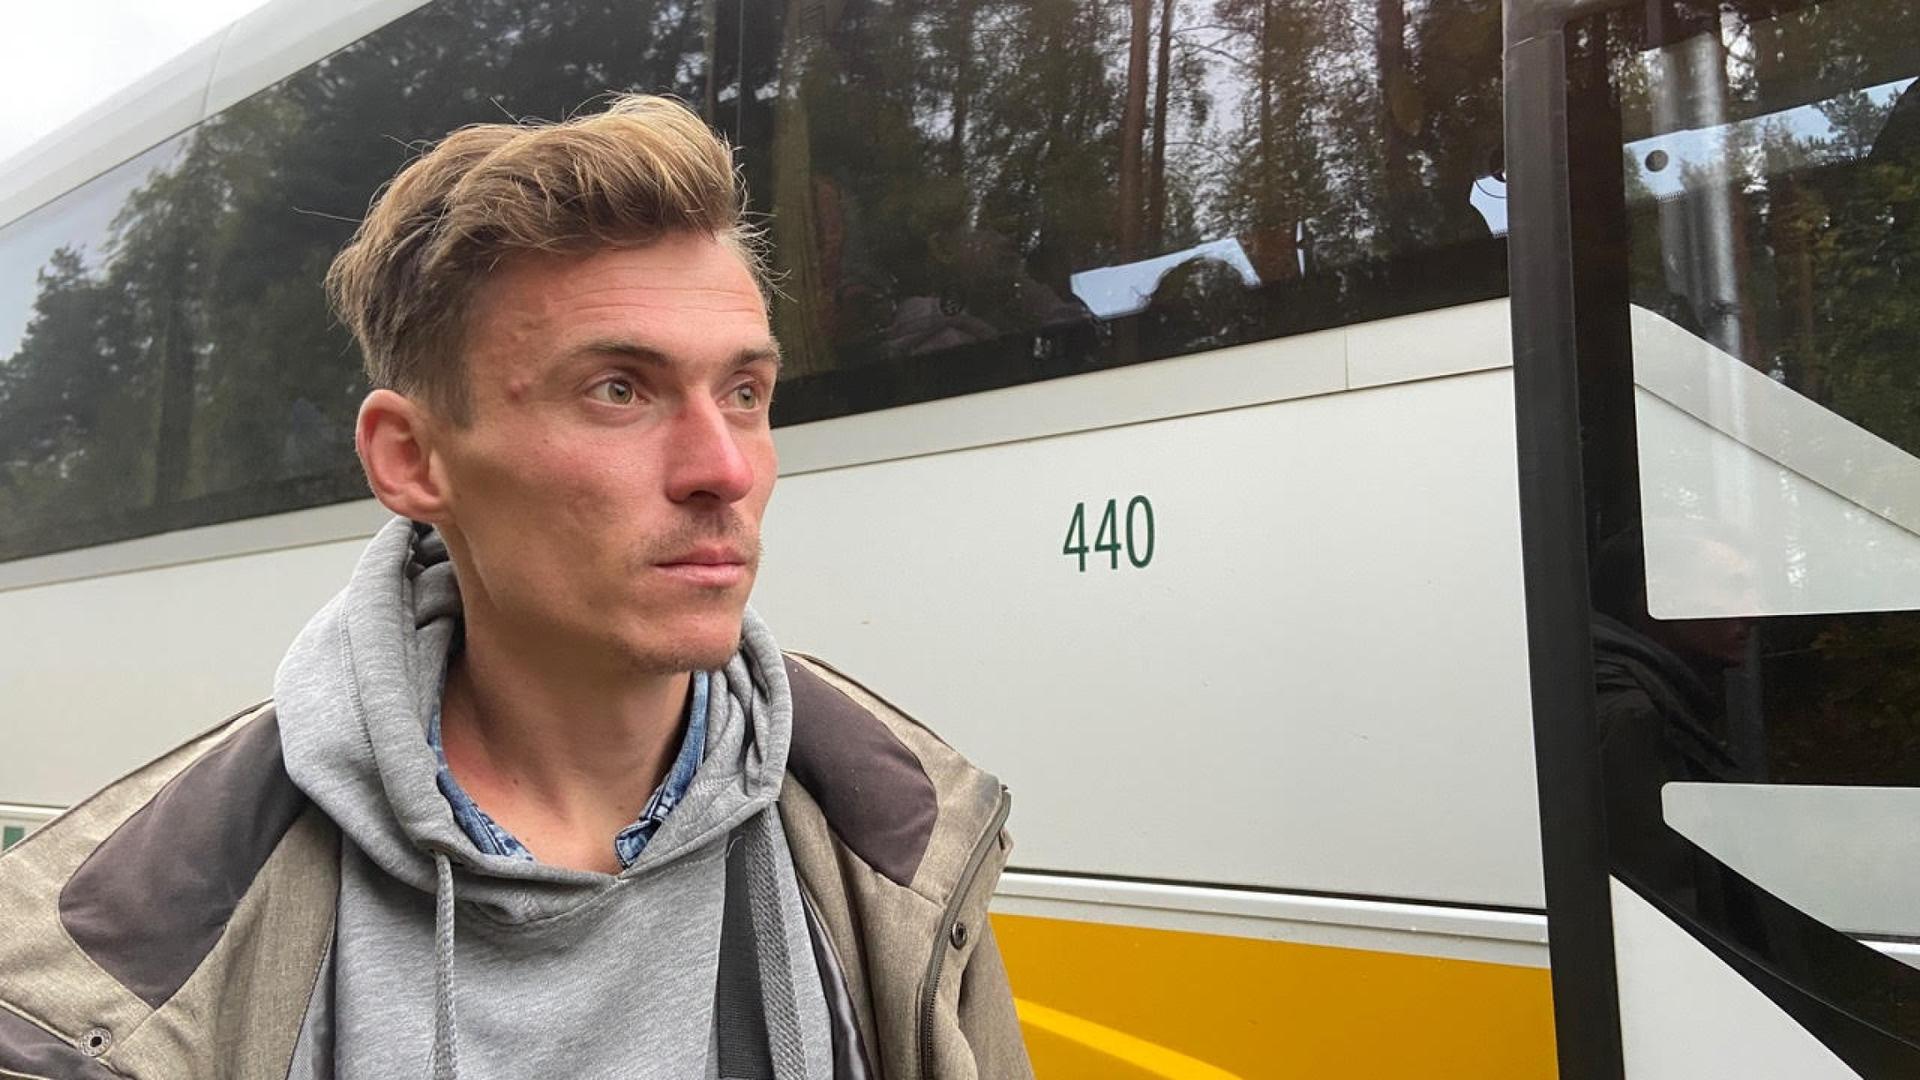 Goran Dimitriev, a 28-year-old shoe salesman from Kherson, reached the Latvian border seven days after fleeing home.